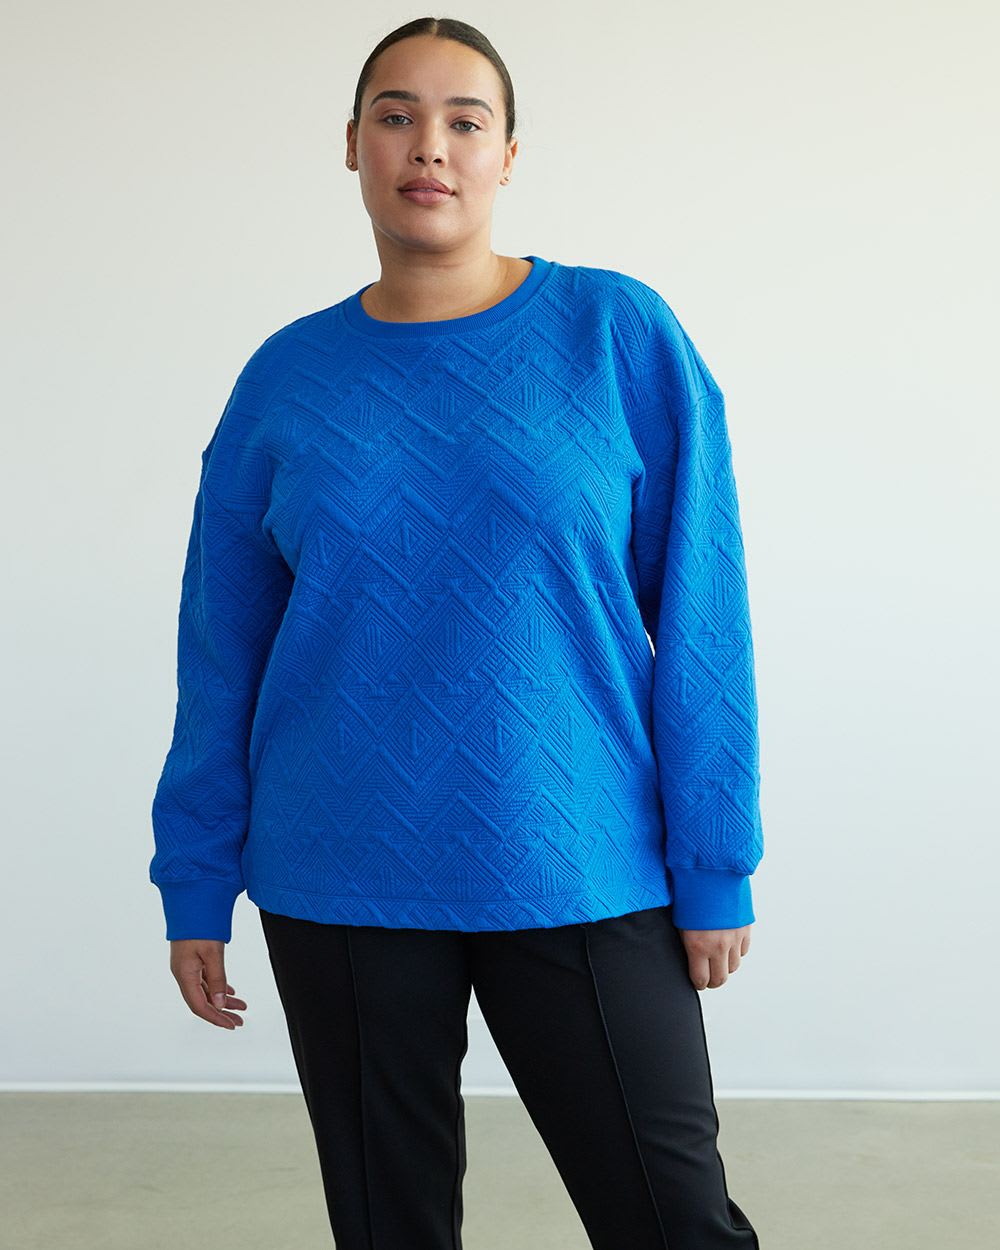 Long-Sleeve Quilted Knit Sweatshirt with Crew Neckline